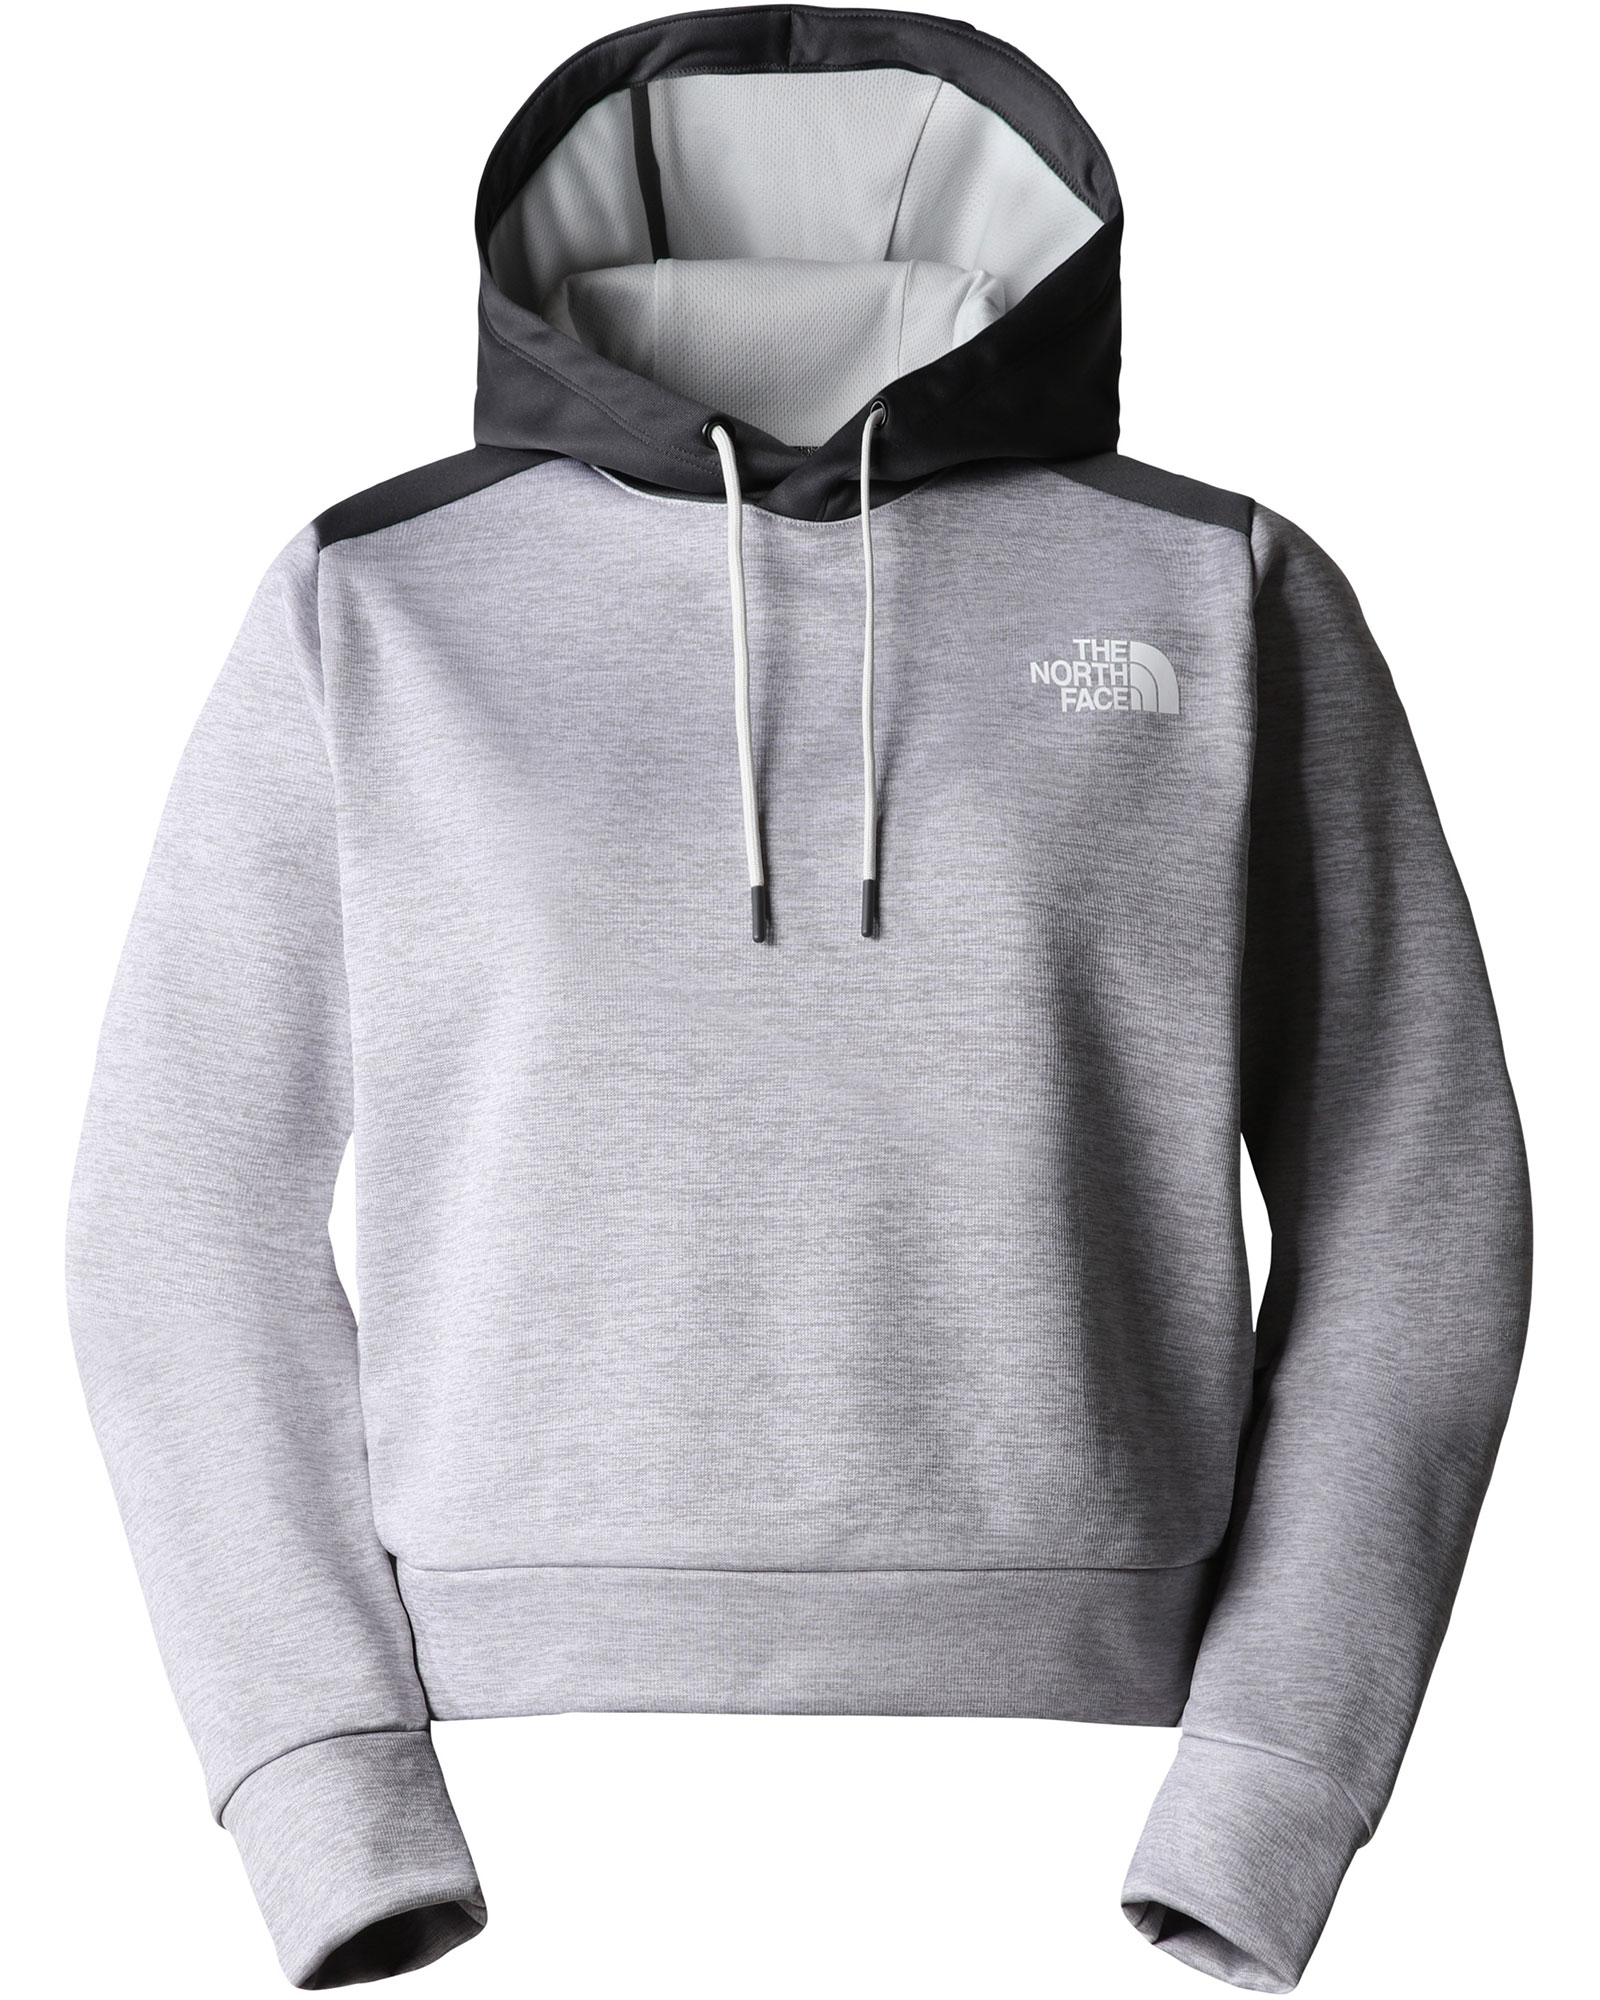 The North Face Reaxion Women’s Fleece Pullover Hoodie - TNF Light Grey Heather S